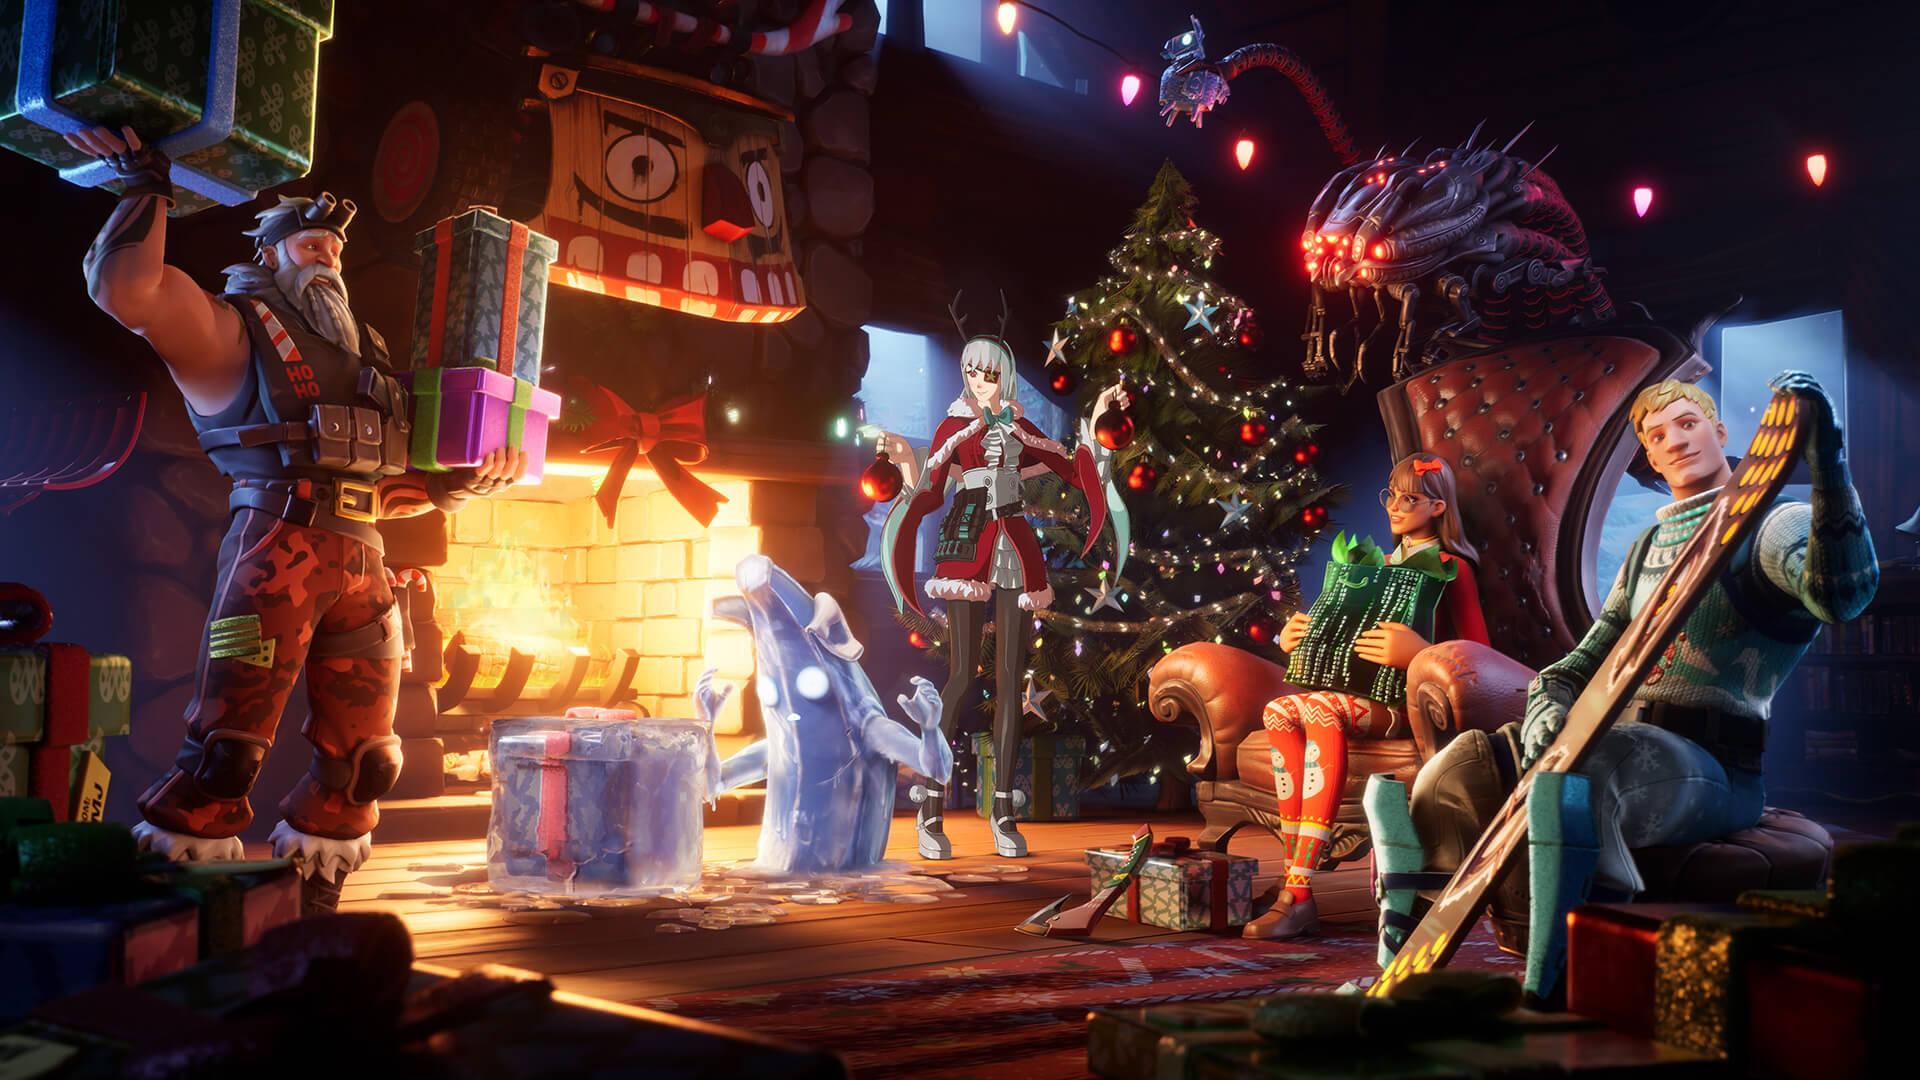 A promotional image from Fortnite showing Jonesy and another character receiving presents in a cozy cabin from Fortnite's Seargent Winter